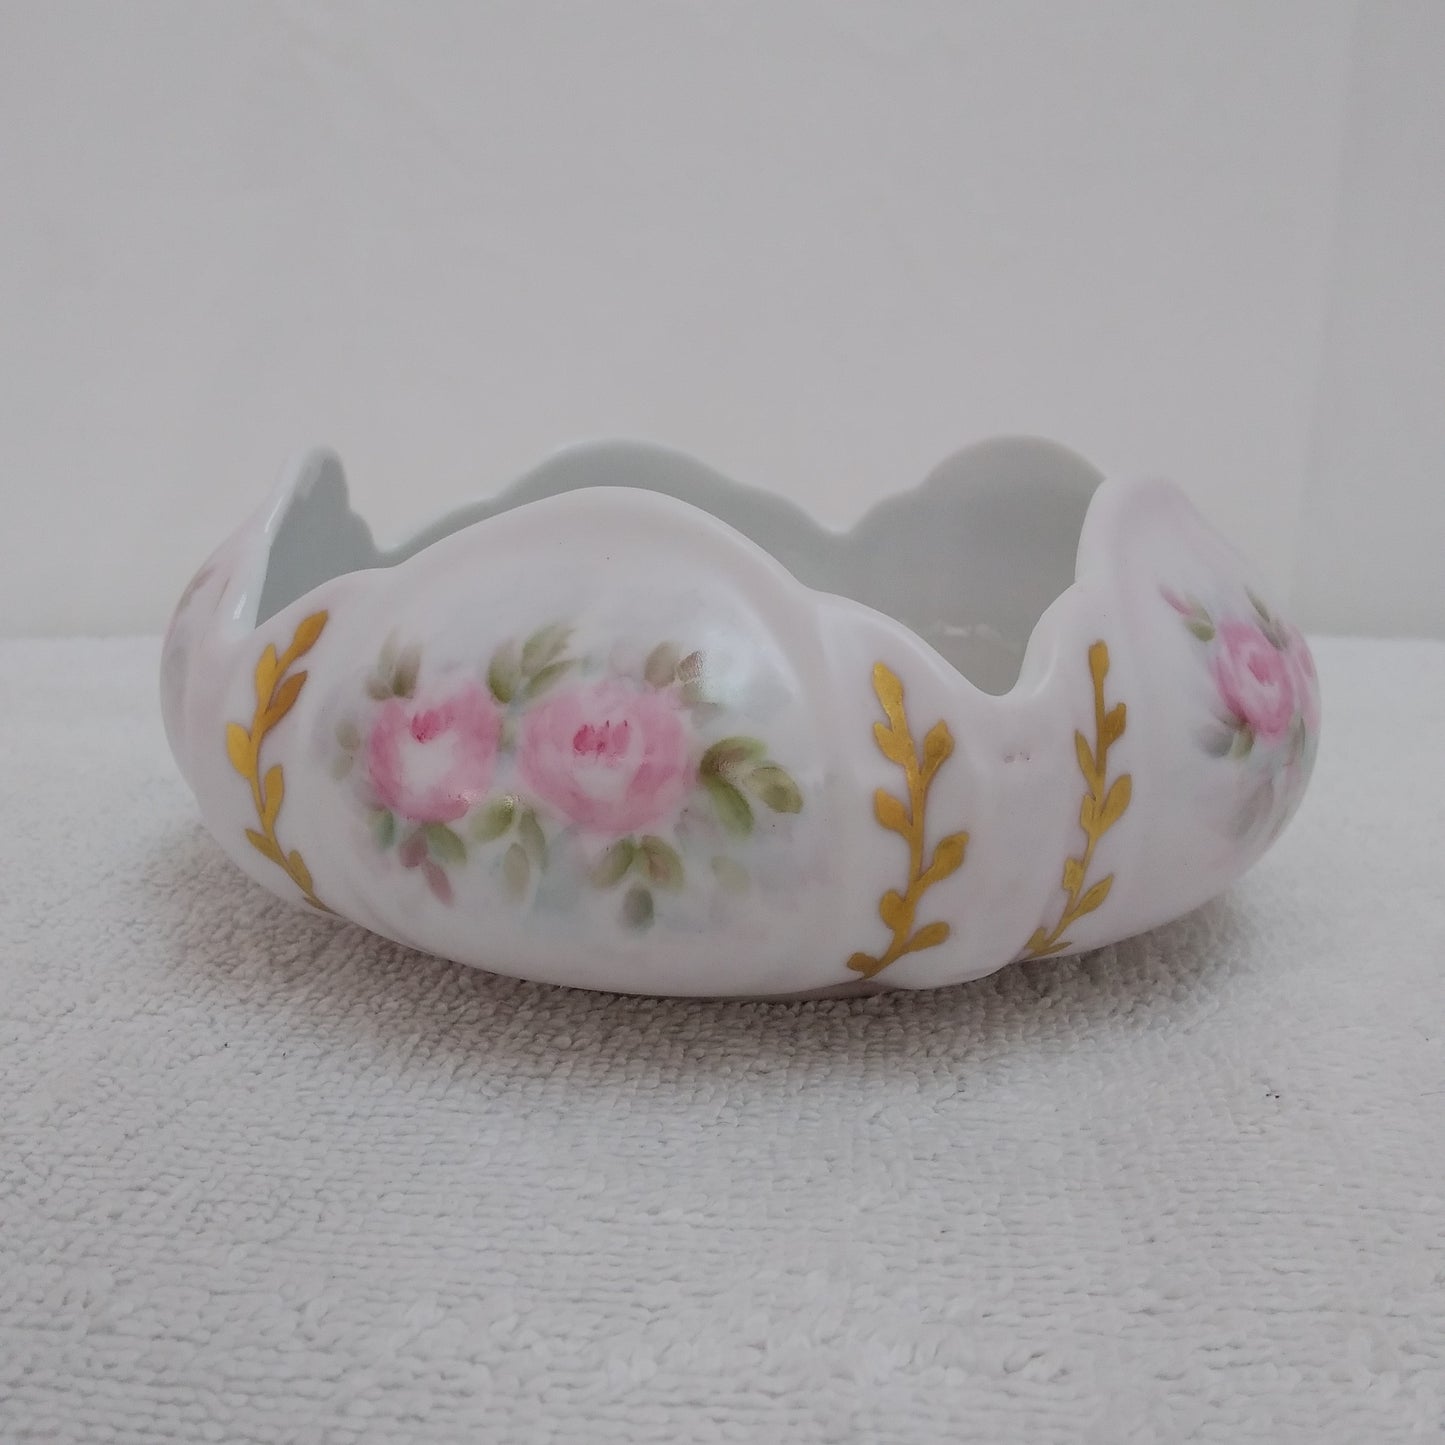 Vintage Floral Scalloped Bowl Hand-Painted by Thelma Joslin